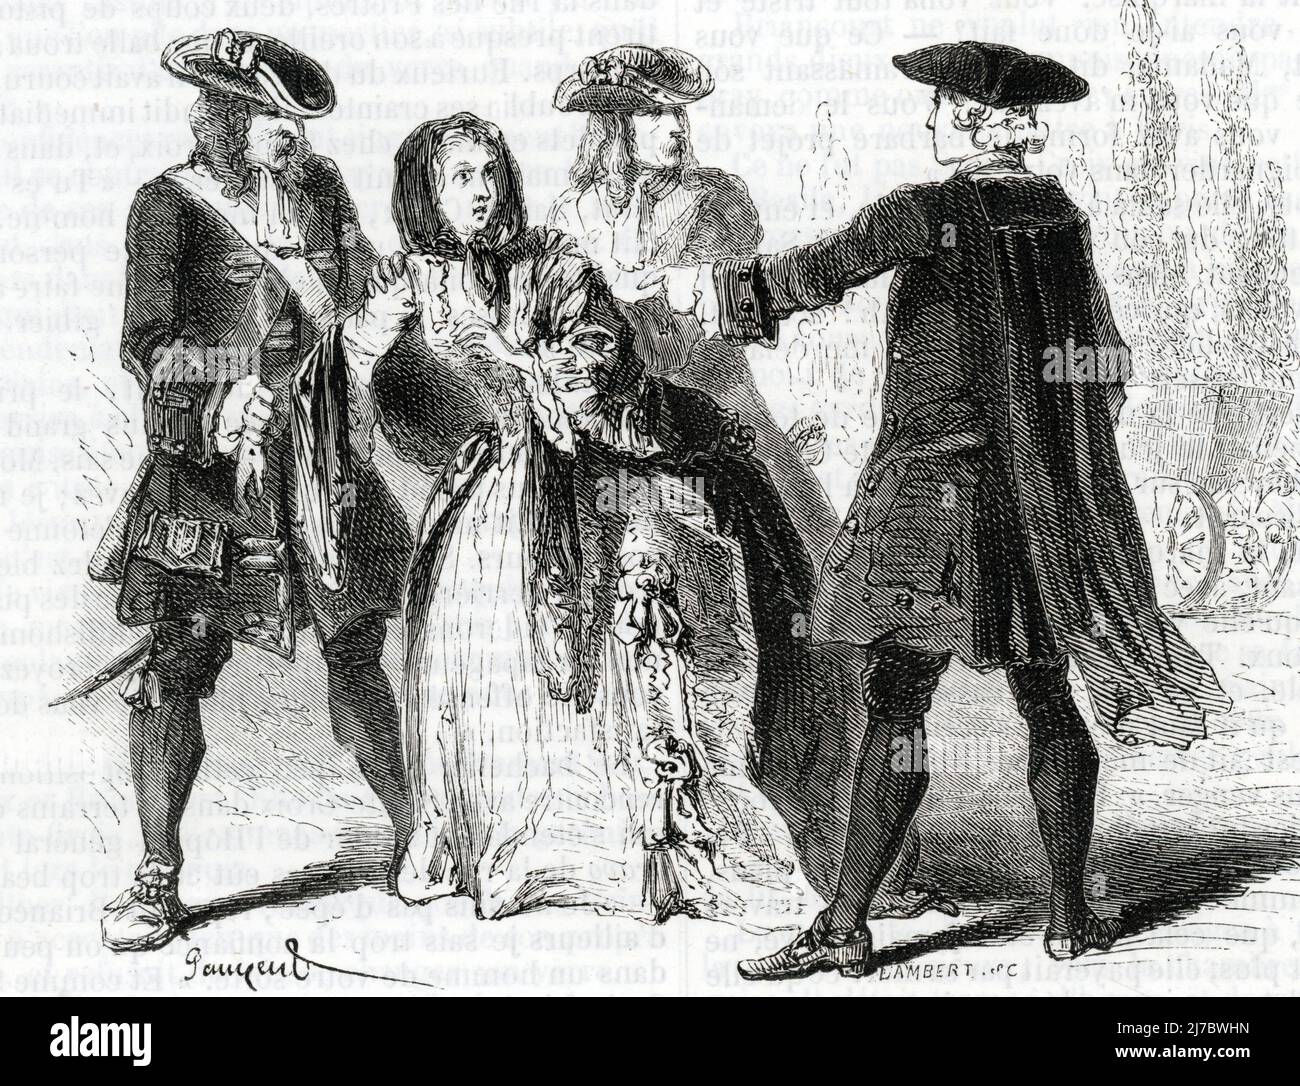 Affaire des poisons : la marquise de Brinvilliers Marie-Madeleine Dreux d'Aubray (1630-1676) arretee a Liege par l'officier de police Francois Degrais mars 1675 (Madame de Brinvilliers French aristocrat who was accused and convicted of murdering her father and two of her brothers in order to inherit their estates get arrested in march 1675) Gravure tiree de 'Causes celebres' de Fouquier 1861 Collection privee Stock Photo